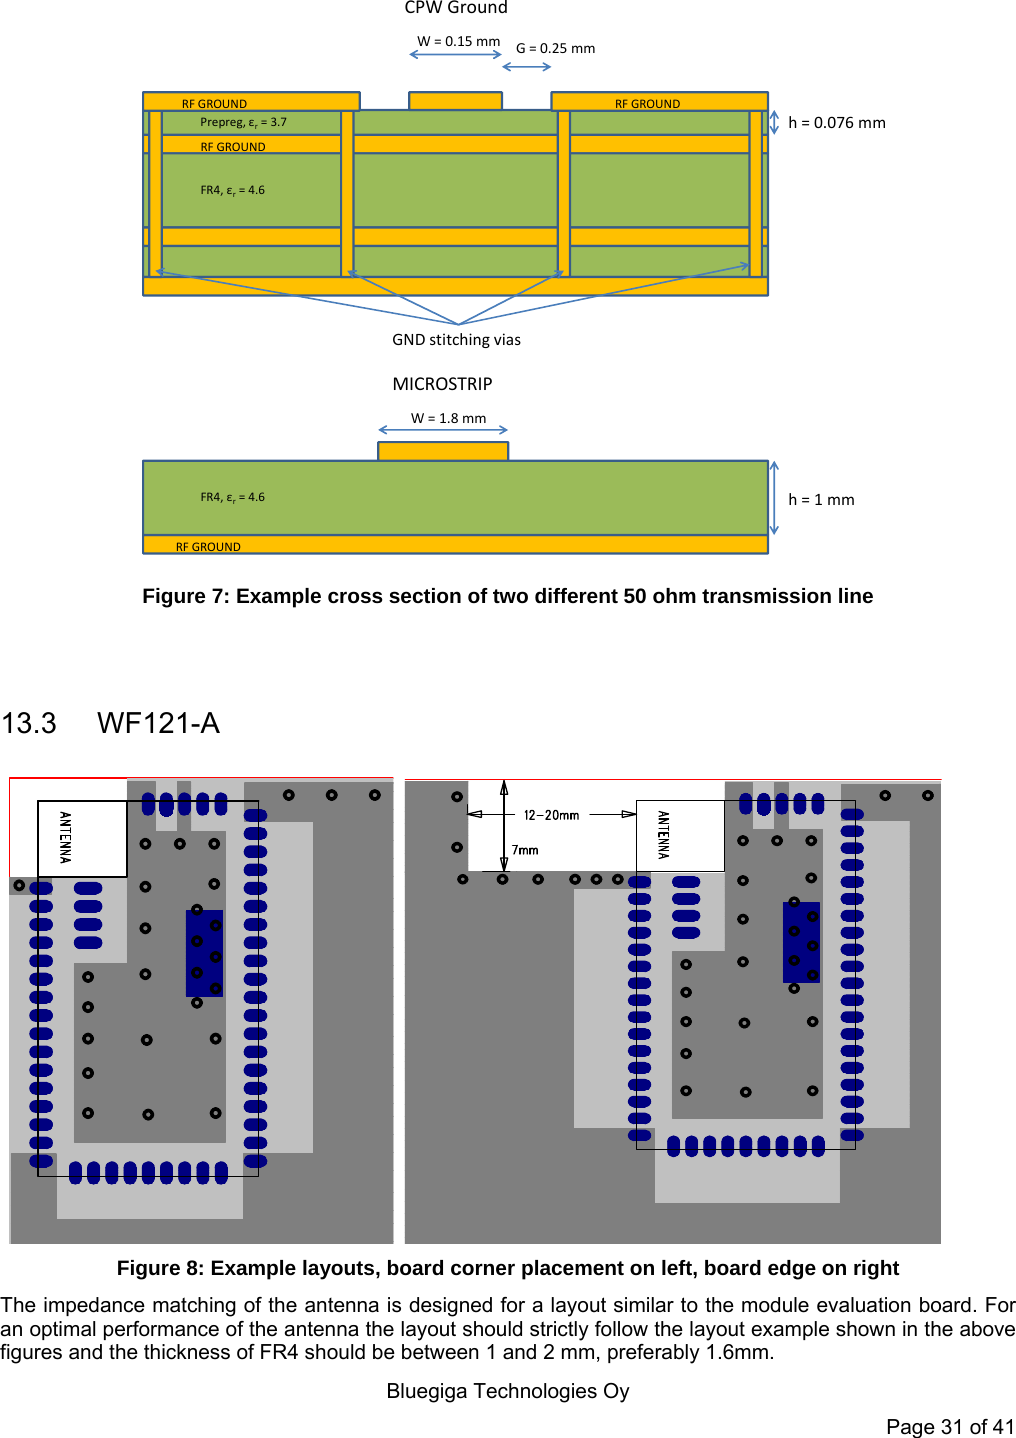  Bluegiga Technologies Oy Page 31 of 41 FR4, εr= 4.6Prepreg, εr= 3.7W = 0.15 mmh = 0.076 mmG = 0.25 mmGND stitching viasRF GROUNDRF GROUND RF GROUNDRF GROUNDFR4, εr= 4.6h = 1 mmW = 1.8 mmMICROSTRIPCPW Ground Figure 7: Example cross section of two different 50 ohm transmission line   13.3  WF121-A     Figure 8: Example layouts, board corner placement on left, board edge on right The impedance matching of the antenna is designed for a layout similar to the module evaluation board. For an optimal performance of the antenna the layout should strictly follow the layout example shown in the above figures and the thickness of FR4 should be between 1 and 2 mm, preferably 1.6mm.  